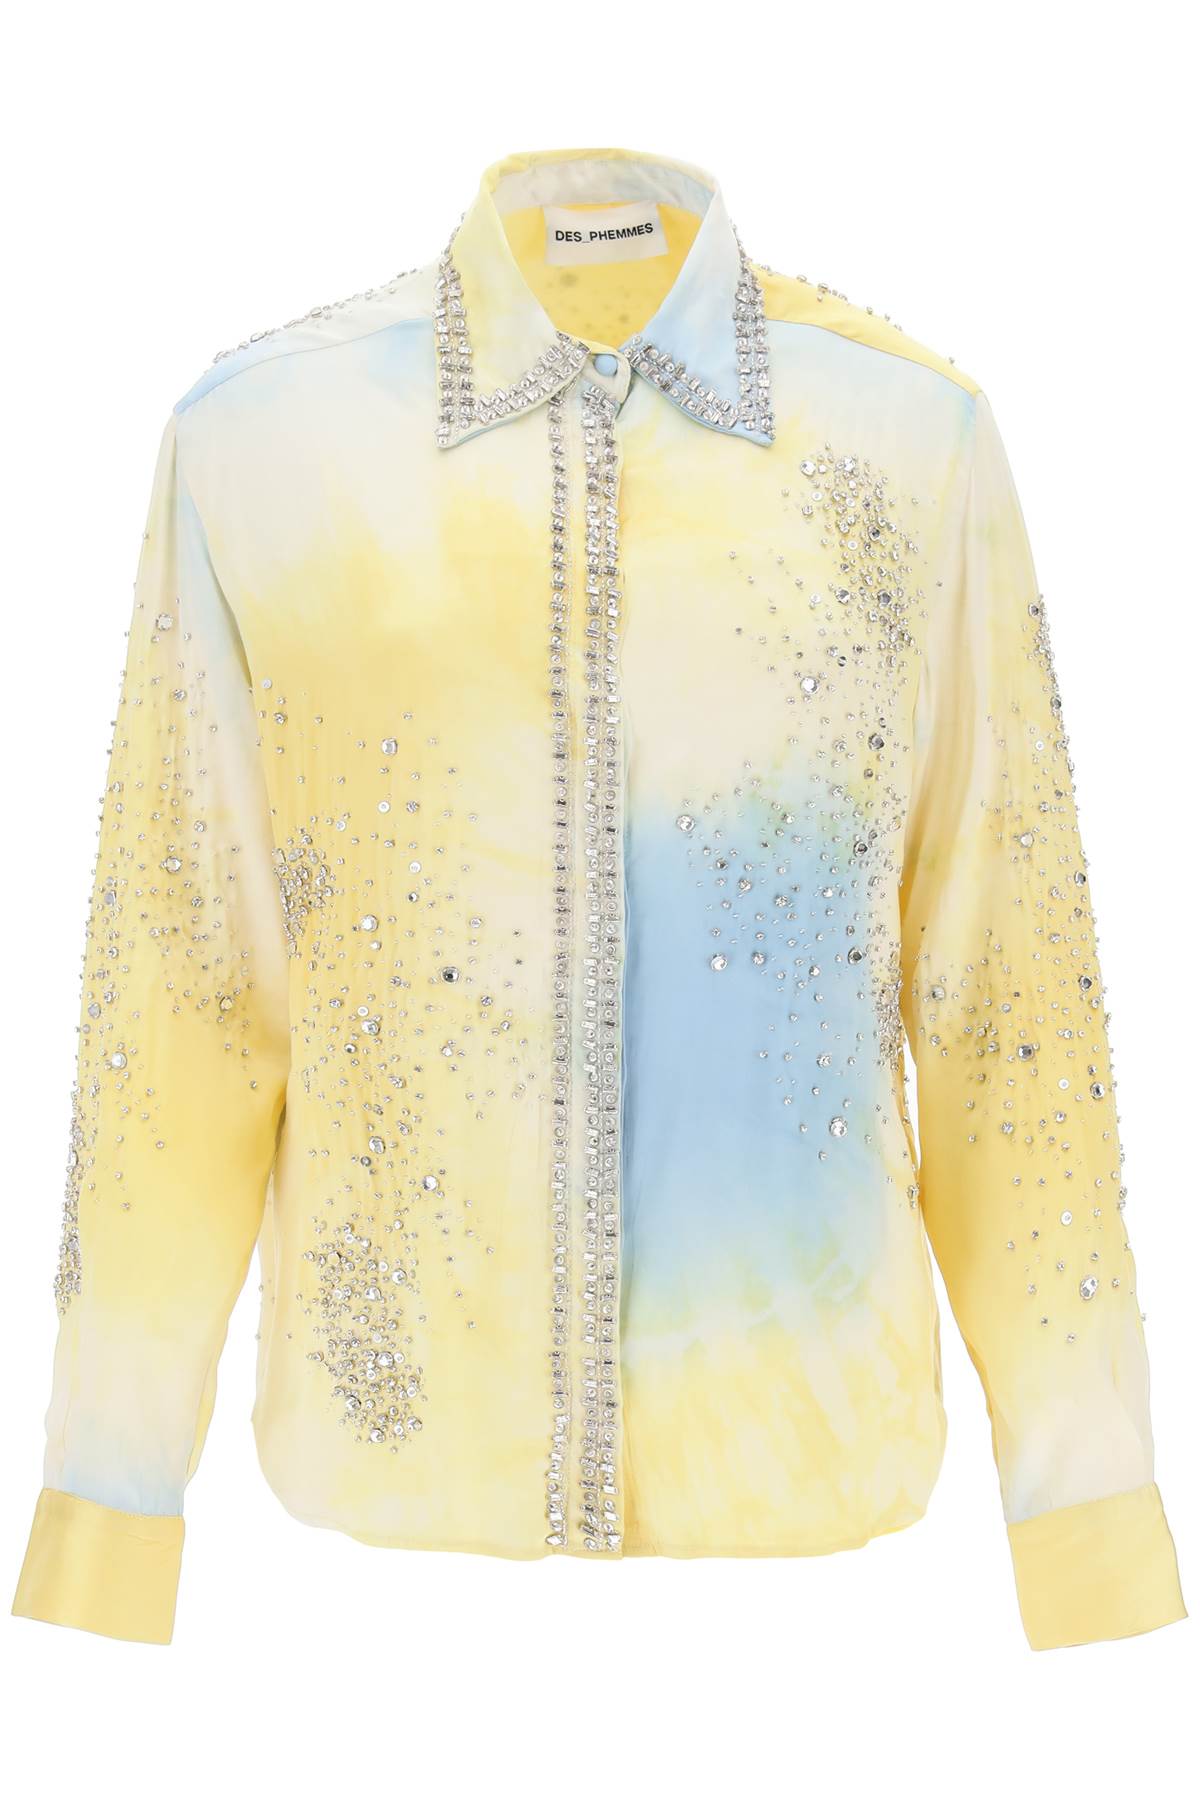 Des Phemmes Silk Satin Shirt With Tie-dye Effect And Appliques